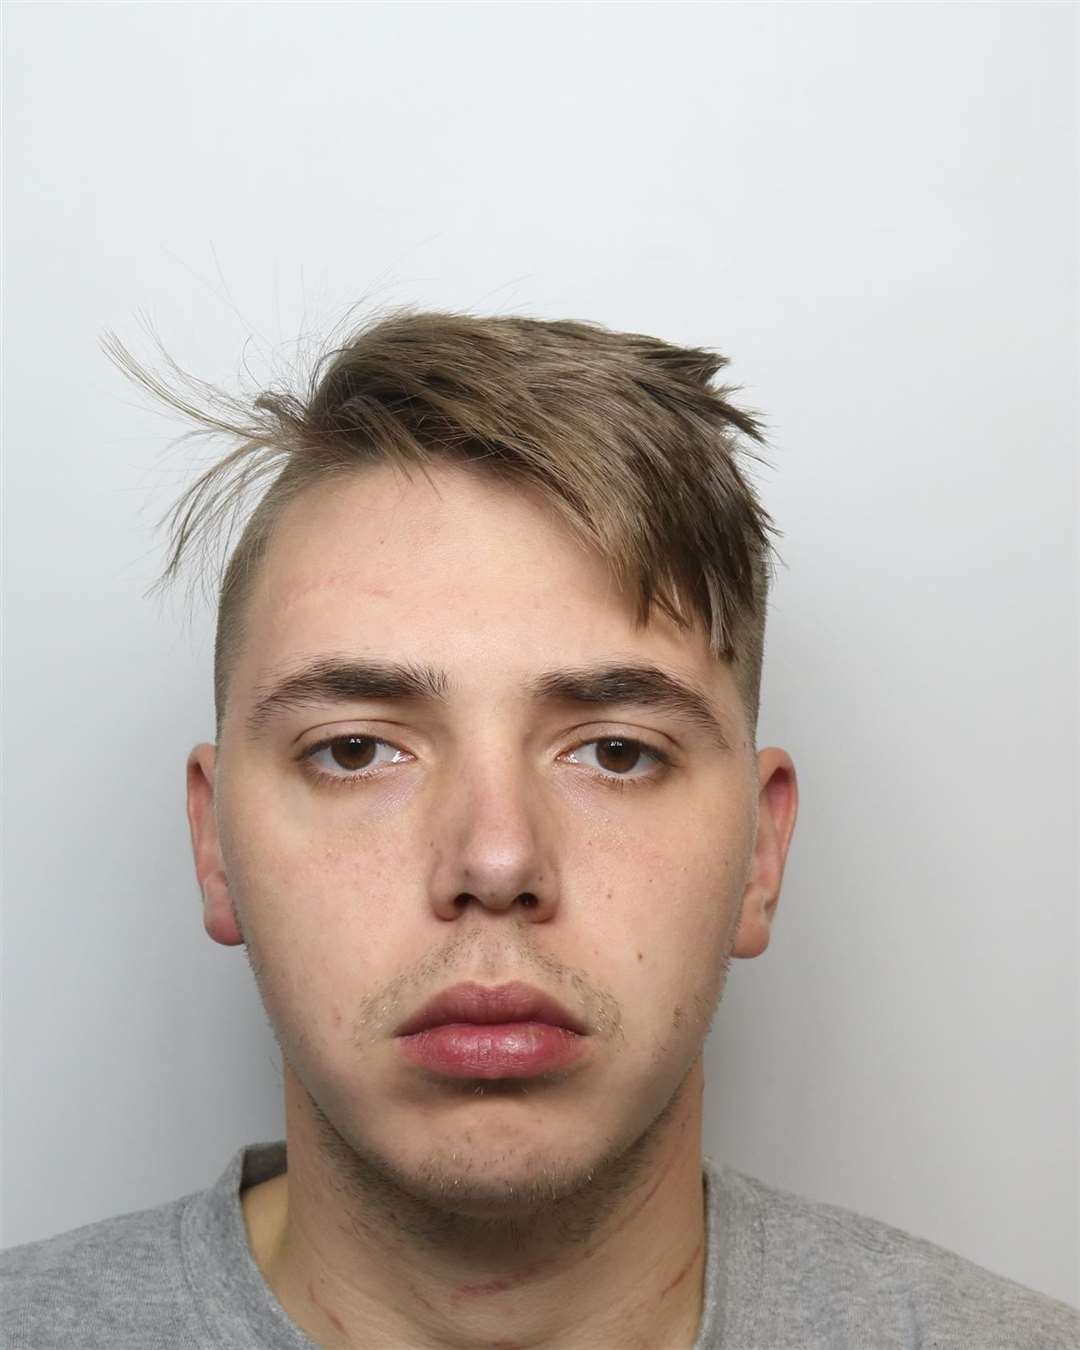 Daniel Waller, of William Munday Way in Dartford has been jailed after trying to rape a woman in her Bradford home. Picture: West Yorkshire Police